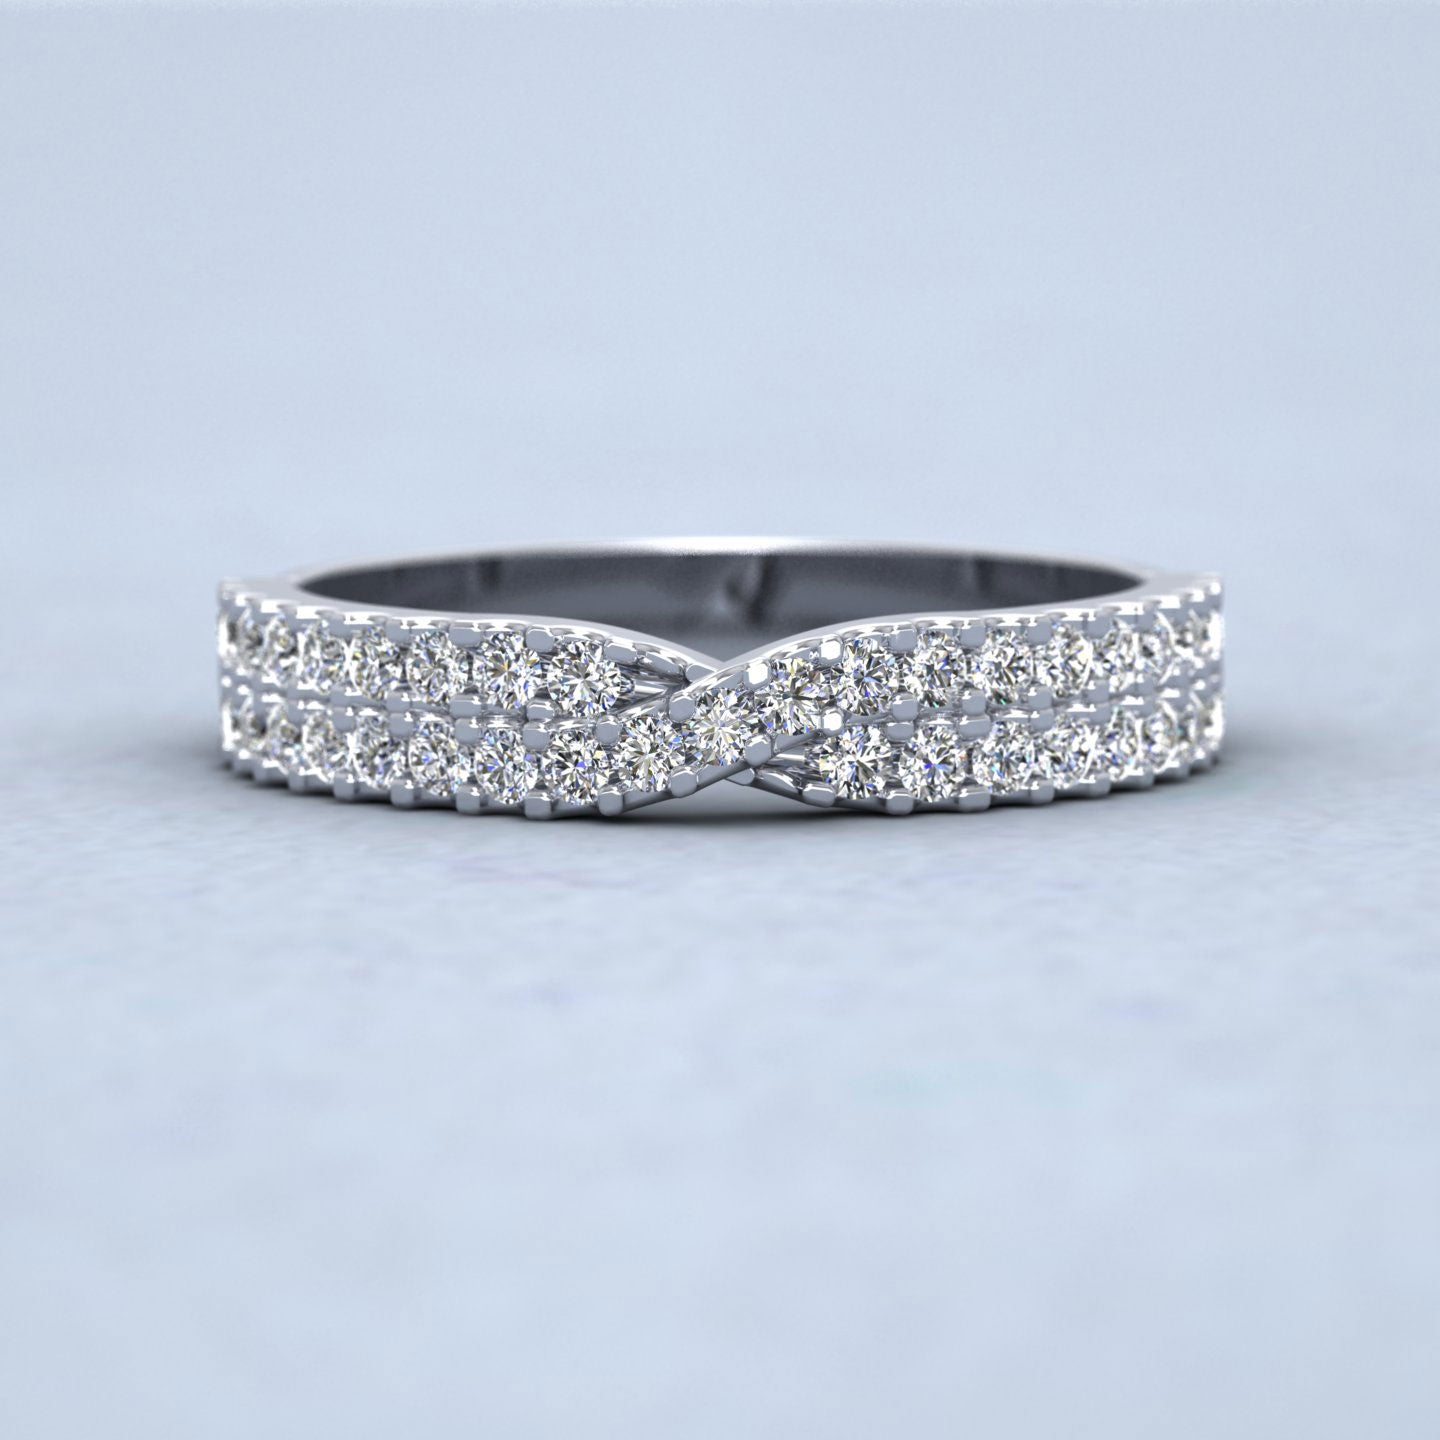 Crossover Diamond Claw Set Wedding Ring In 9ct White Gold 3.5mm Wide